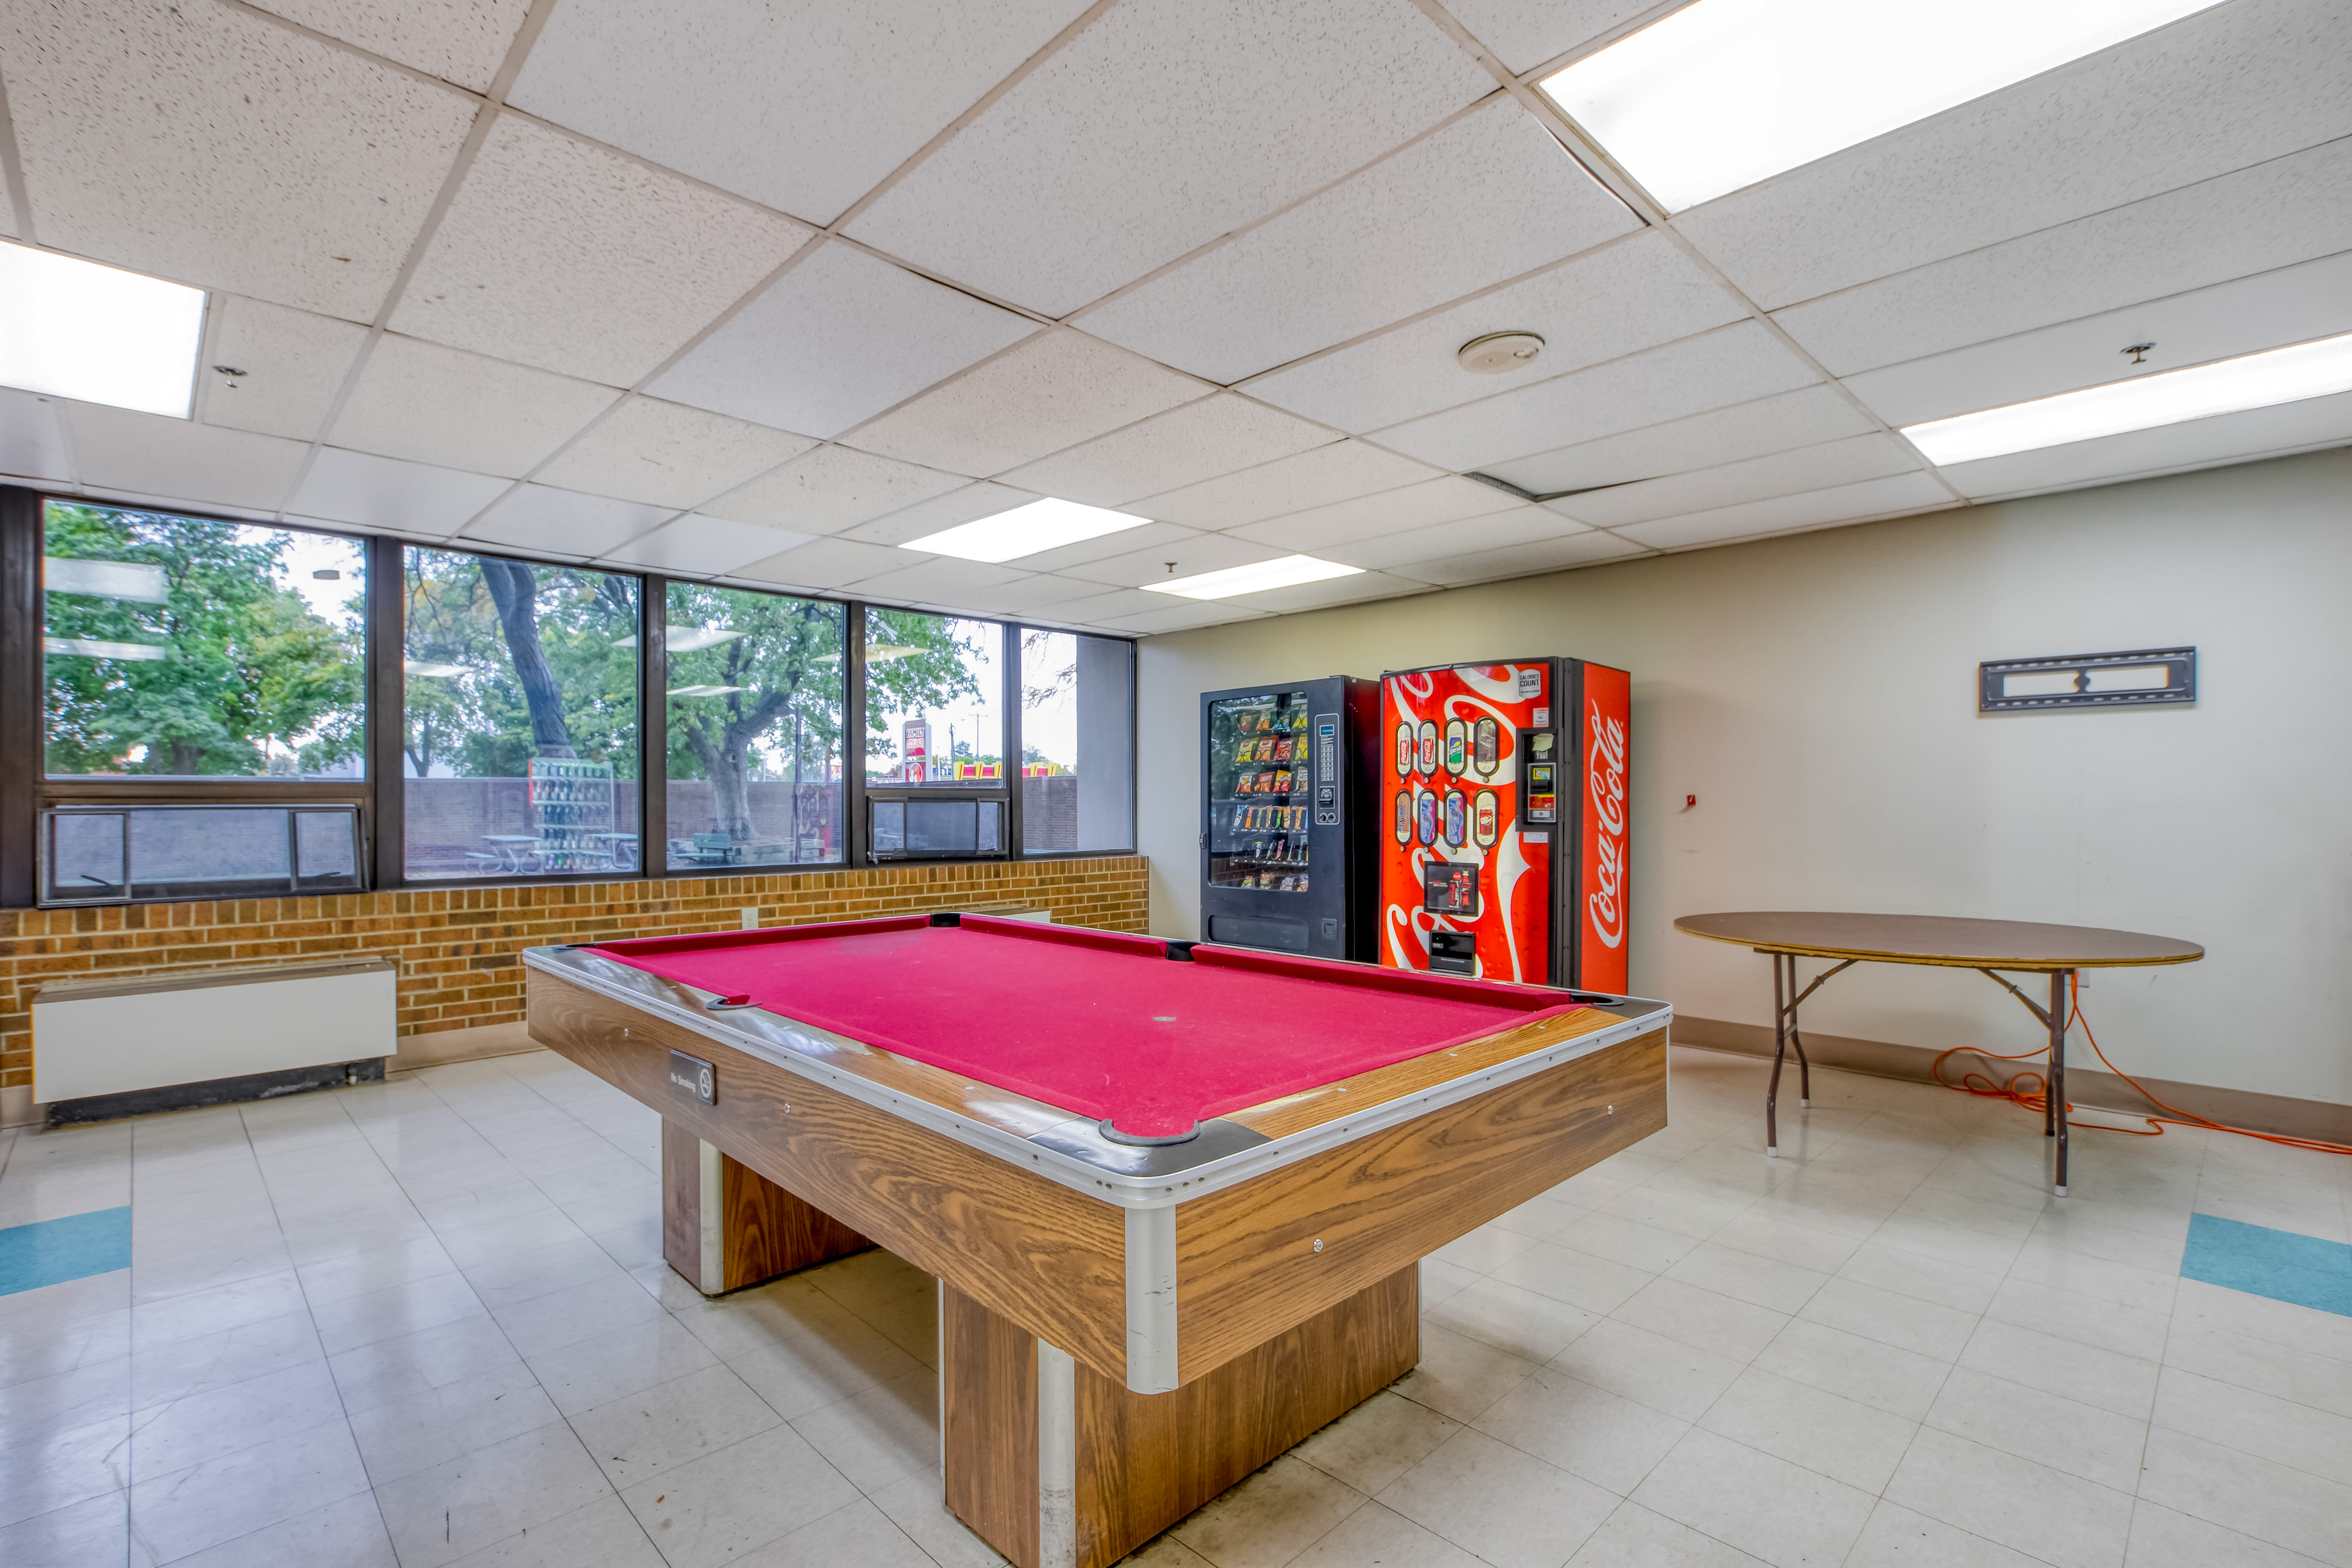 Pool table in the recreation center at Bowin Place in Detroit, Michigan